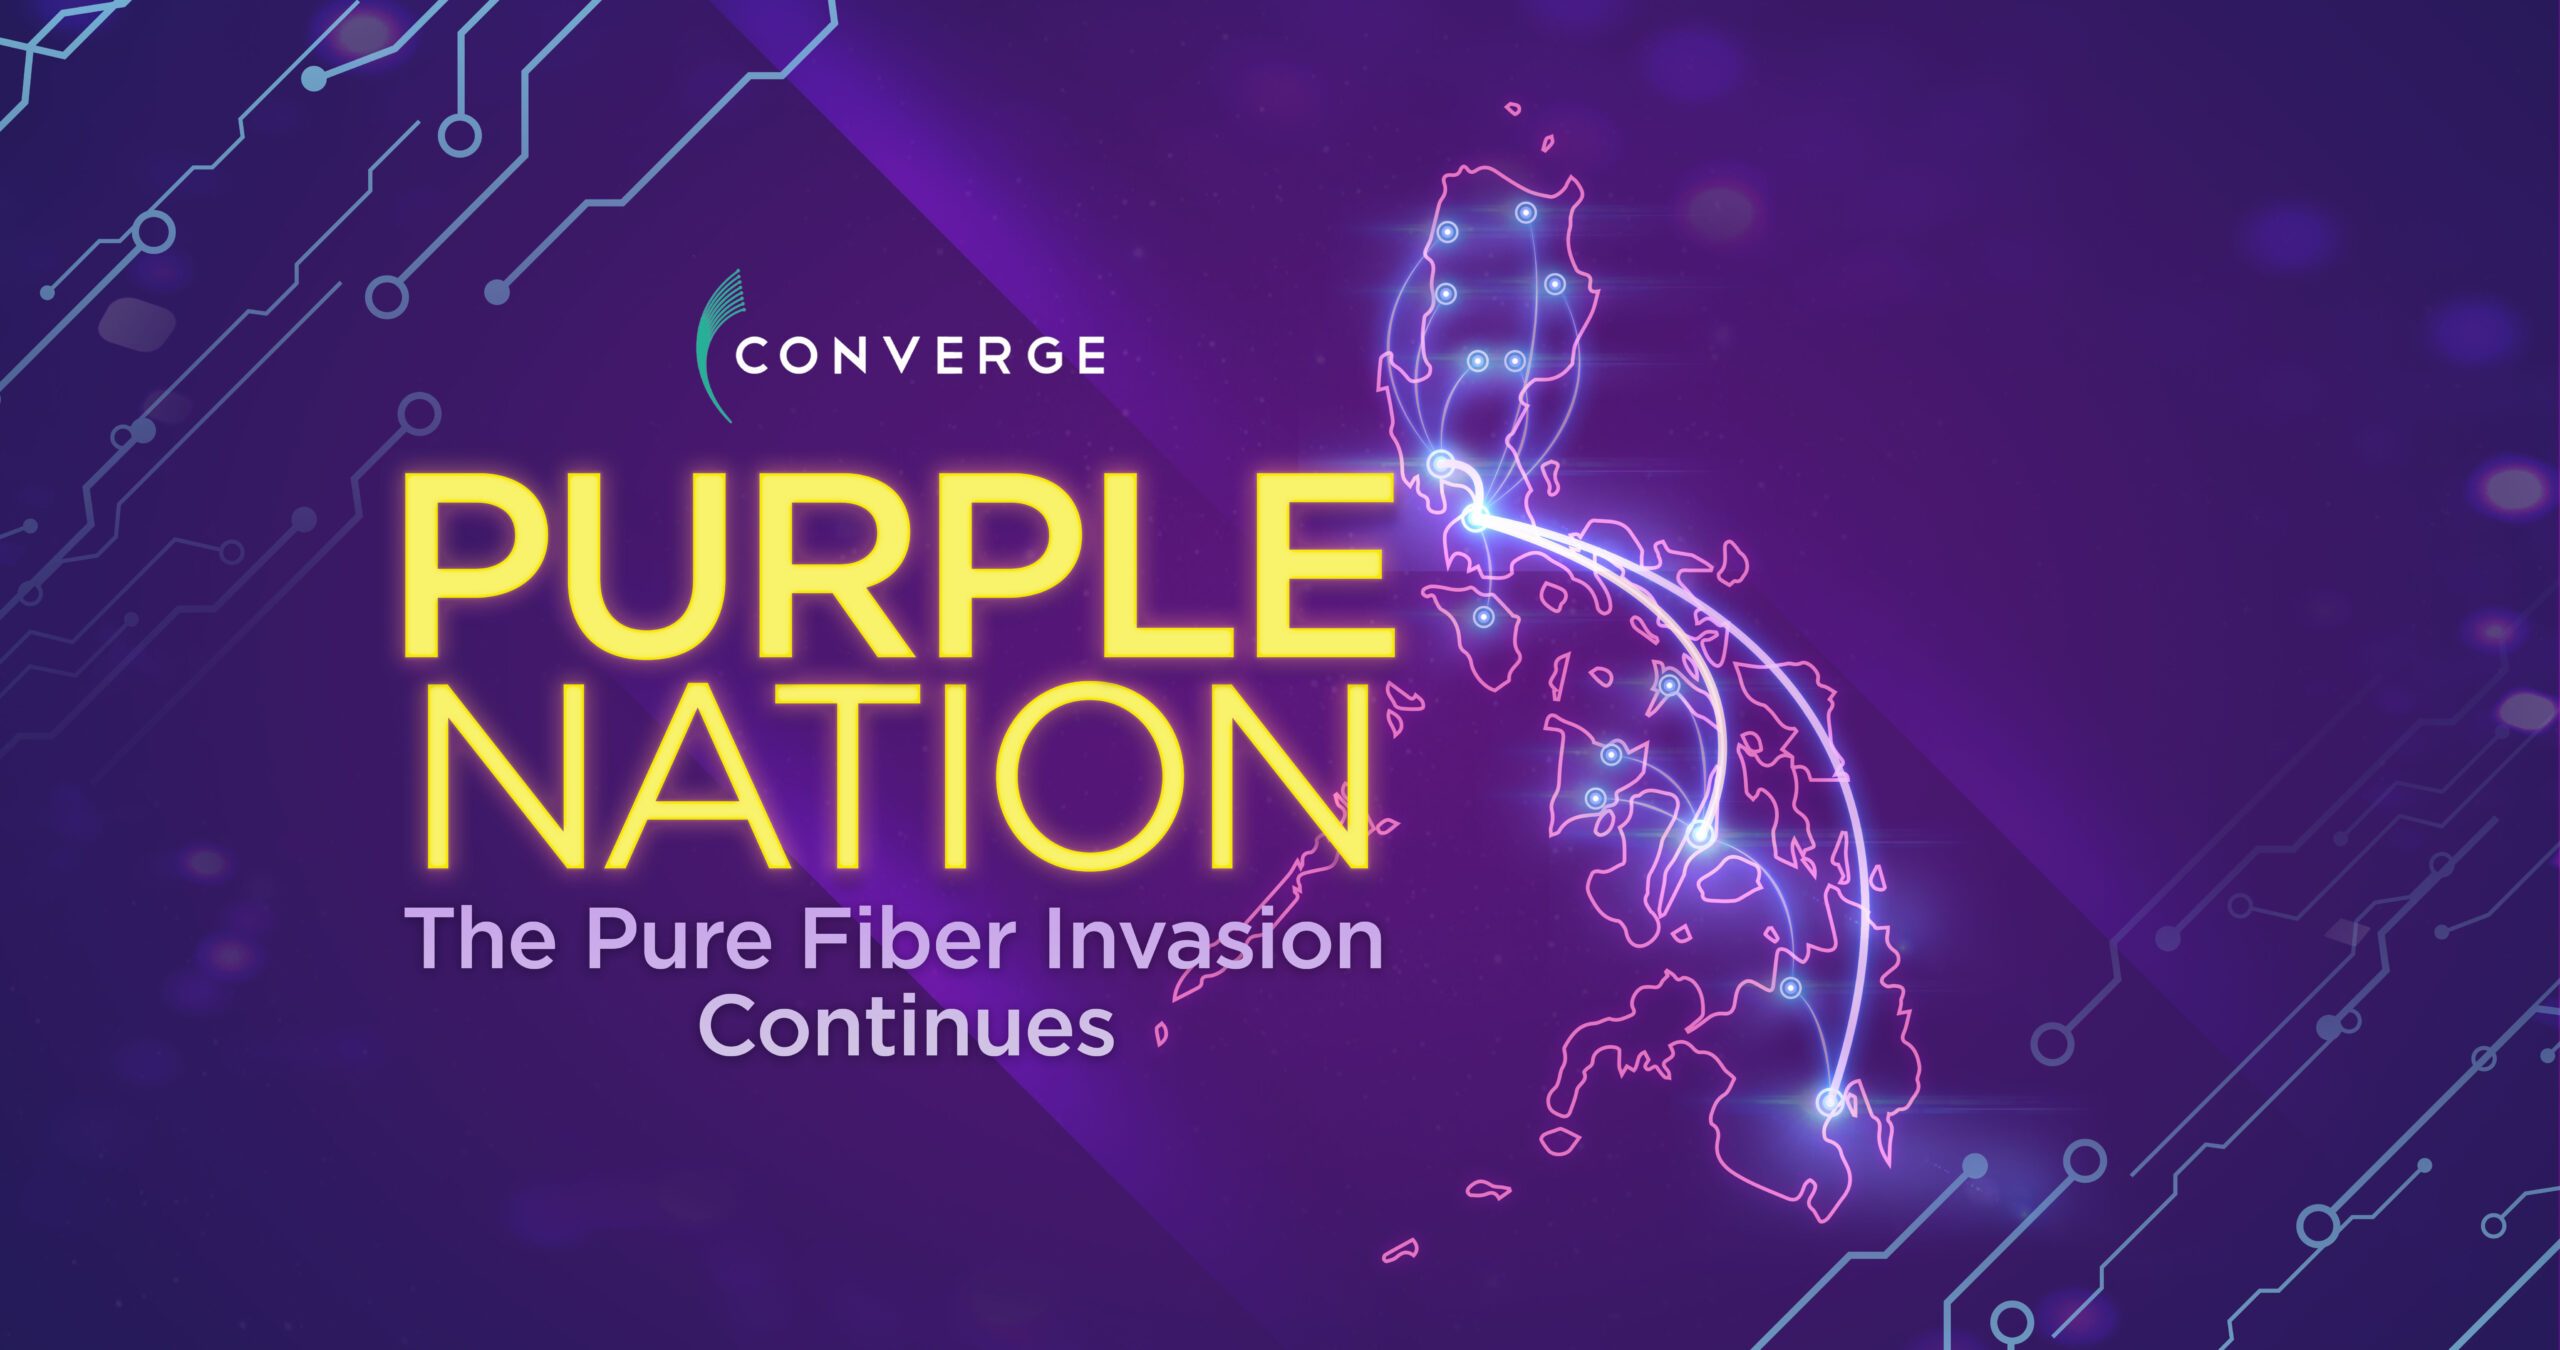 Converge covers Philippines with pure fiber, installs nearly 5.5 million ports nationwide